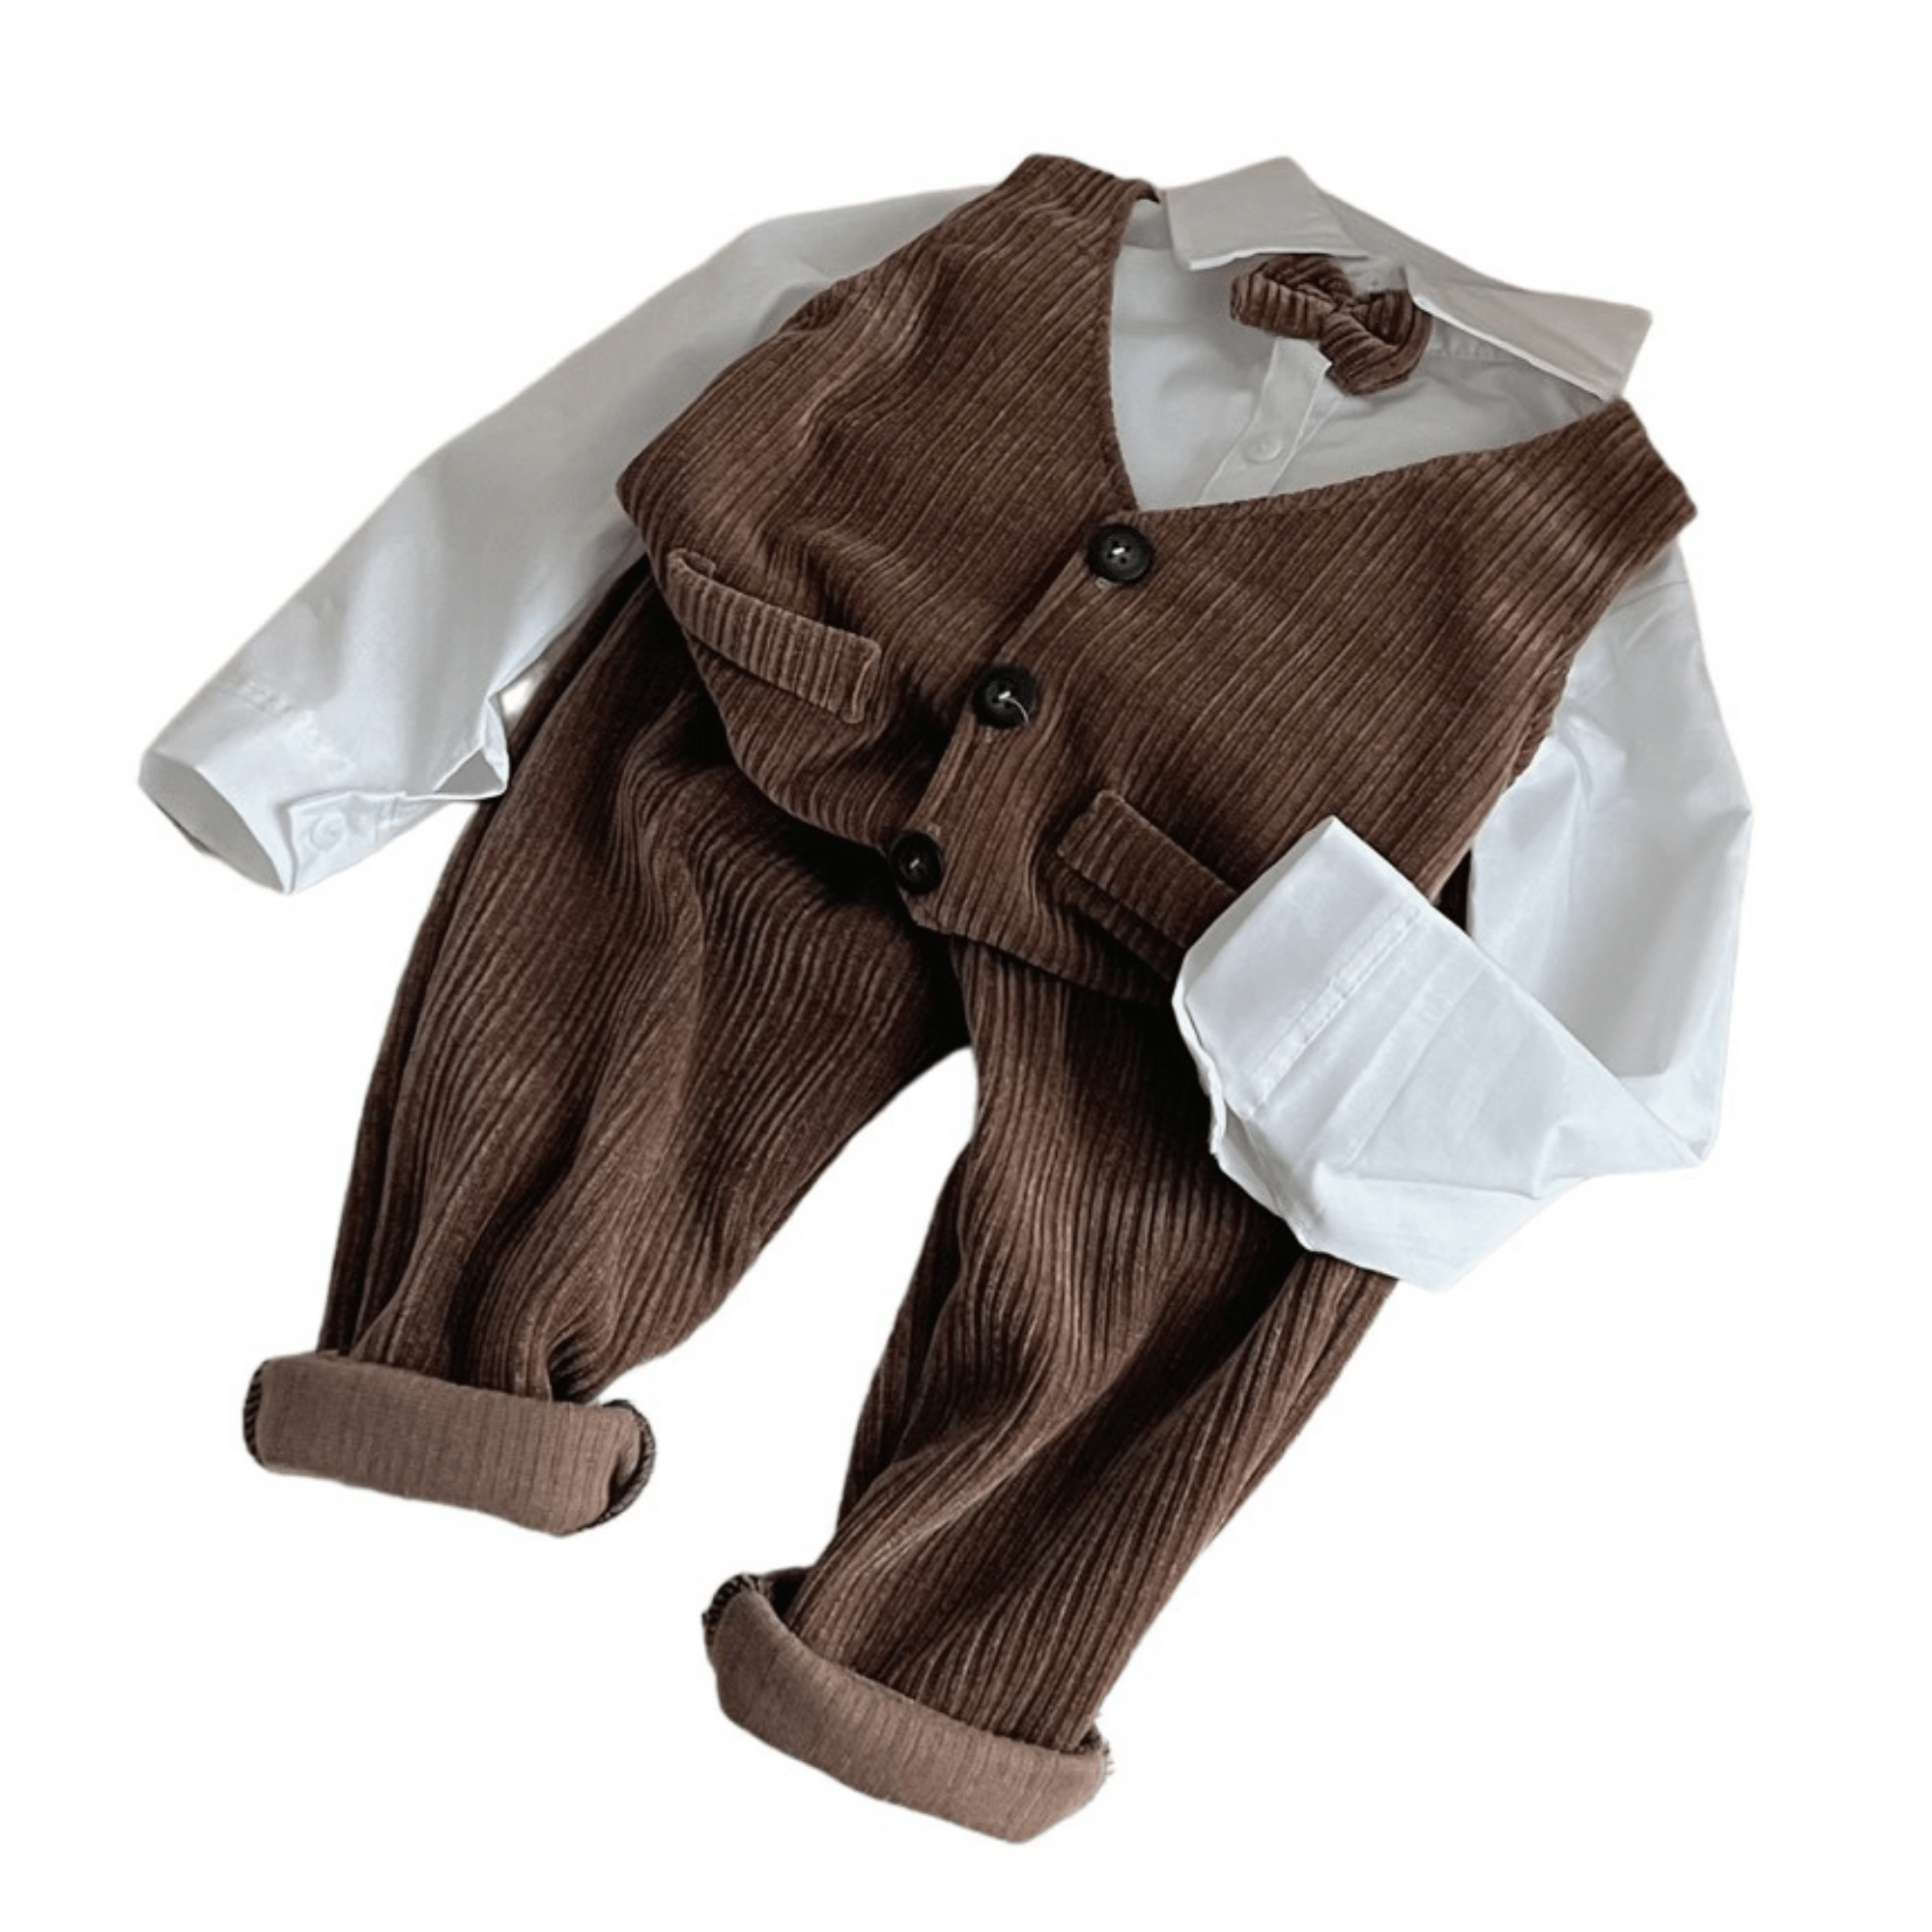 Clothes For Kids Factory Price Natural Baby Boys Set Cute Each One In Opp Bag Made In Vietnam Manufacturer